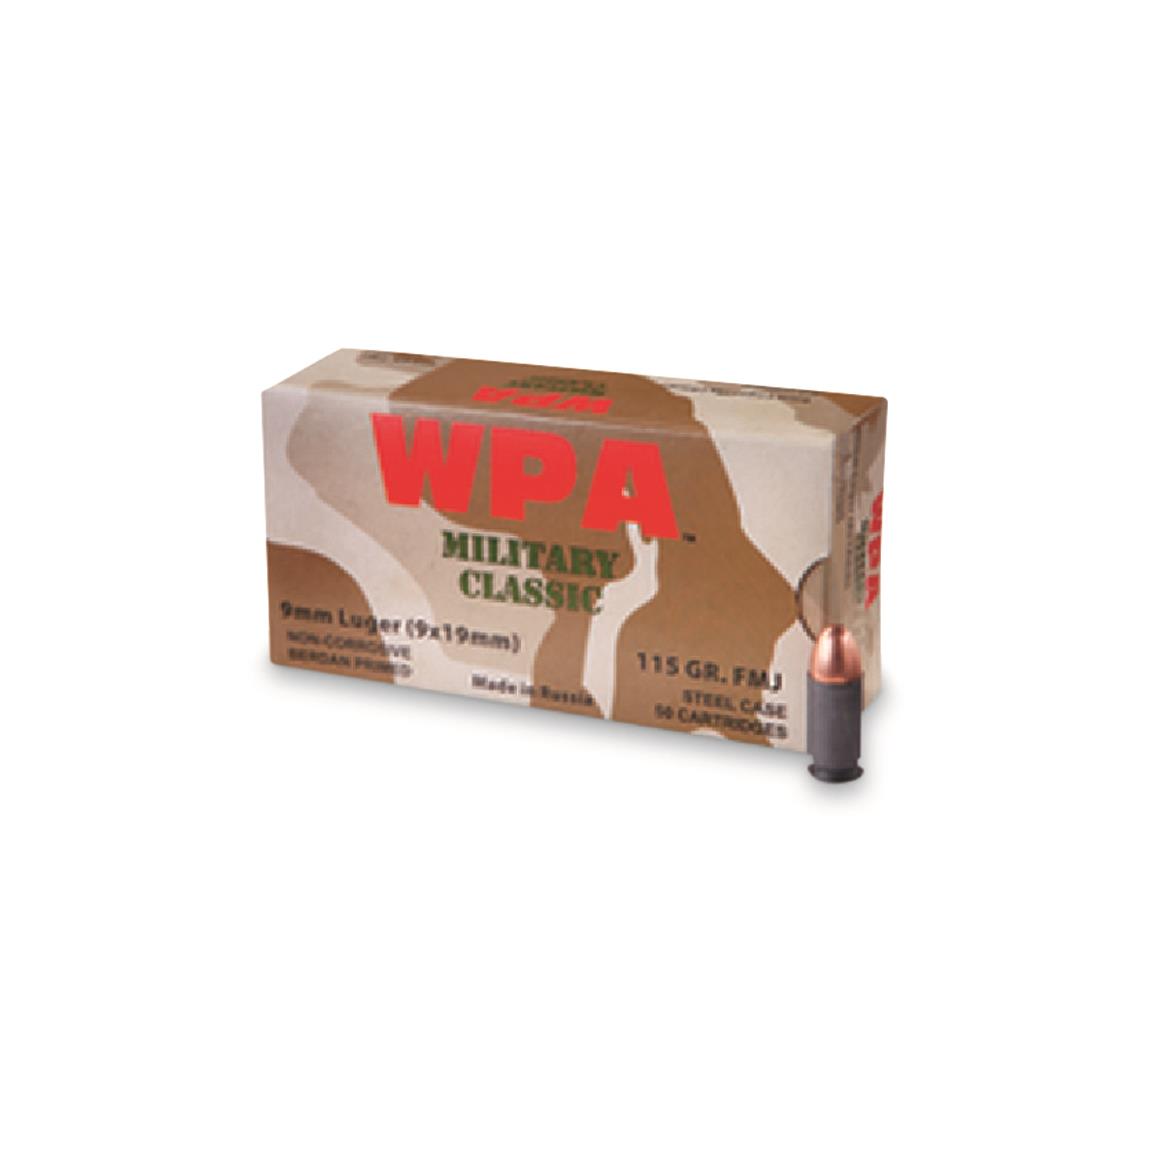 Wolf WPA Military Classic, 9mm, FMJ, 115 Grain, 50 Rounds - 126923, 9mm ...